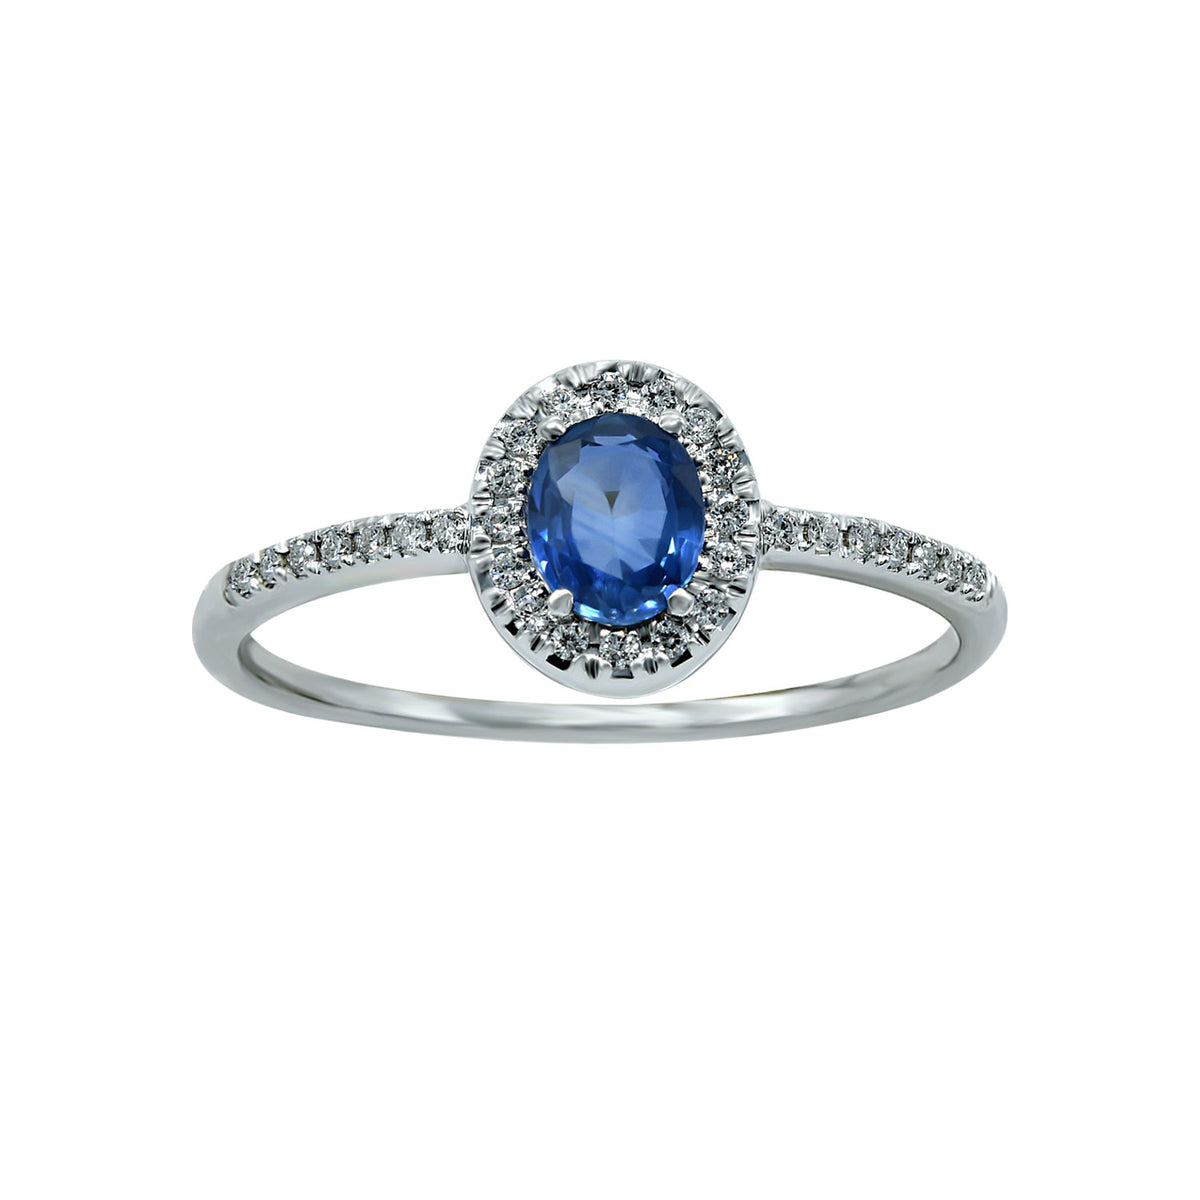 Sapphire Ring. Diamond and sapphire ring. Oval shaped sapphire ring.